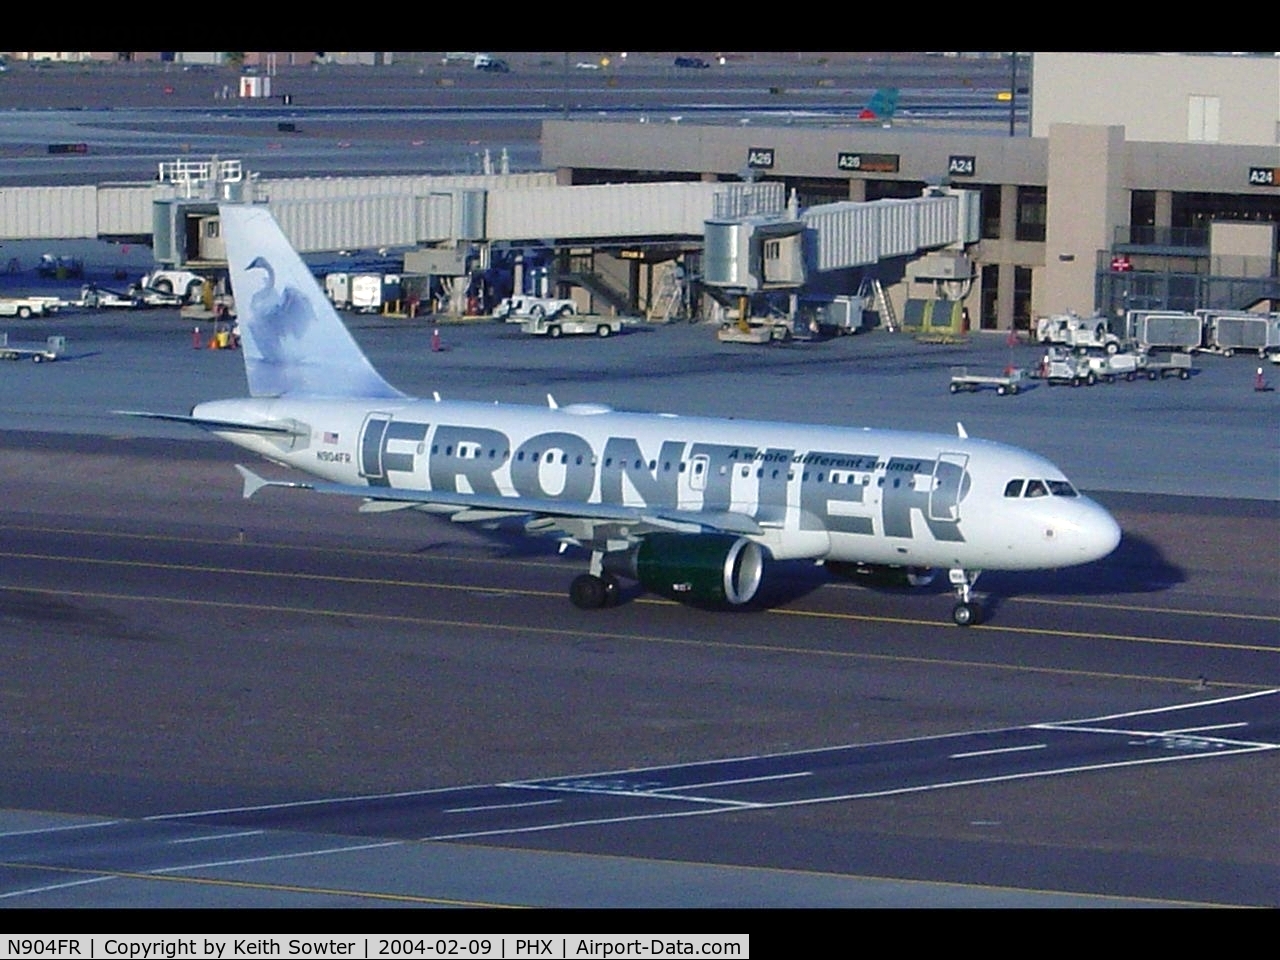 N904FR, 2001 Airbus A319-111 C/N 1579, Taxying over the Skybridge